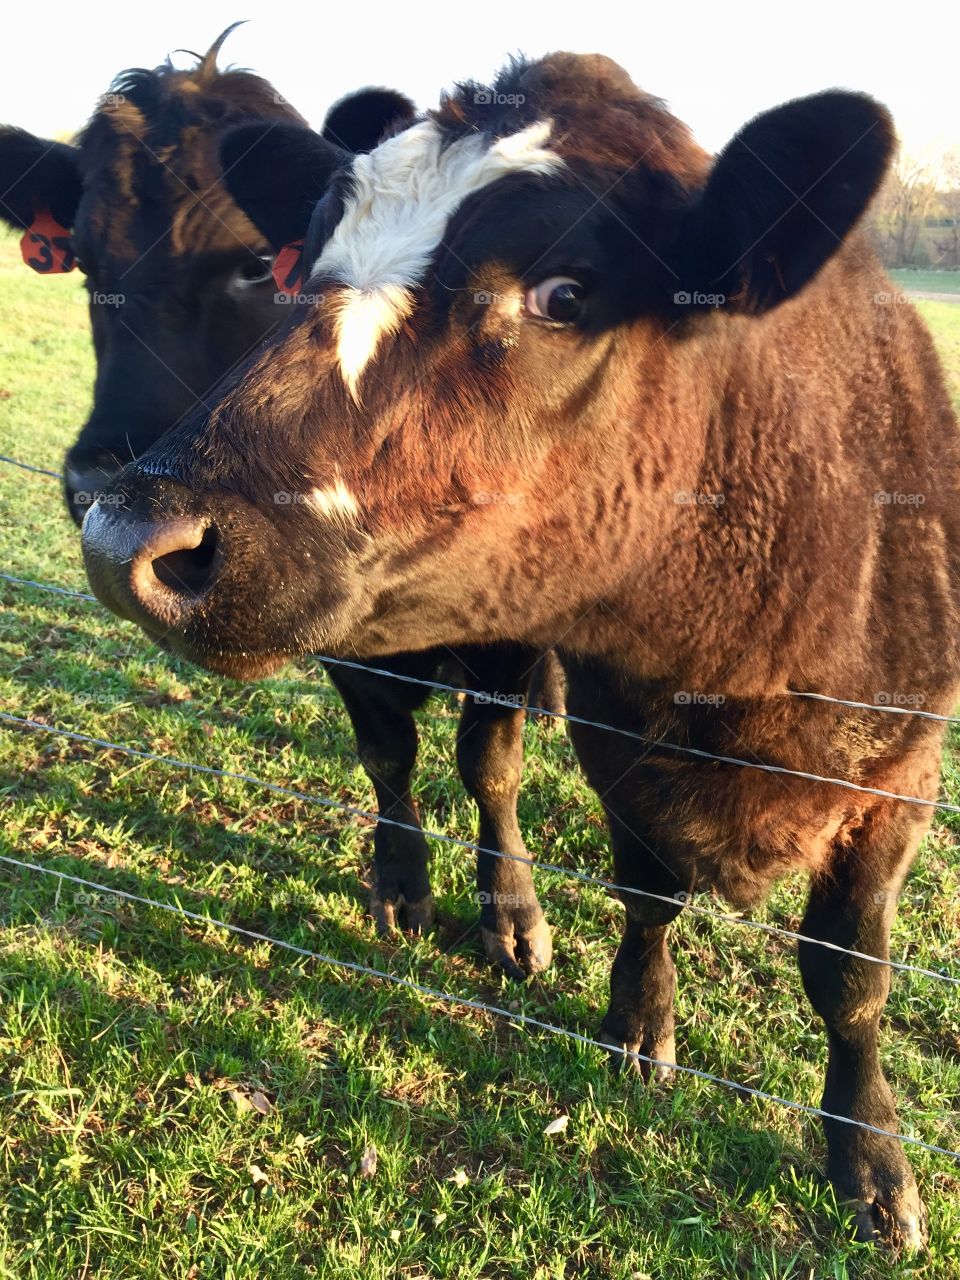 Two friendly steers, standing and looking over a wire fence in a grassy pasture on a bright spring morning